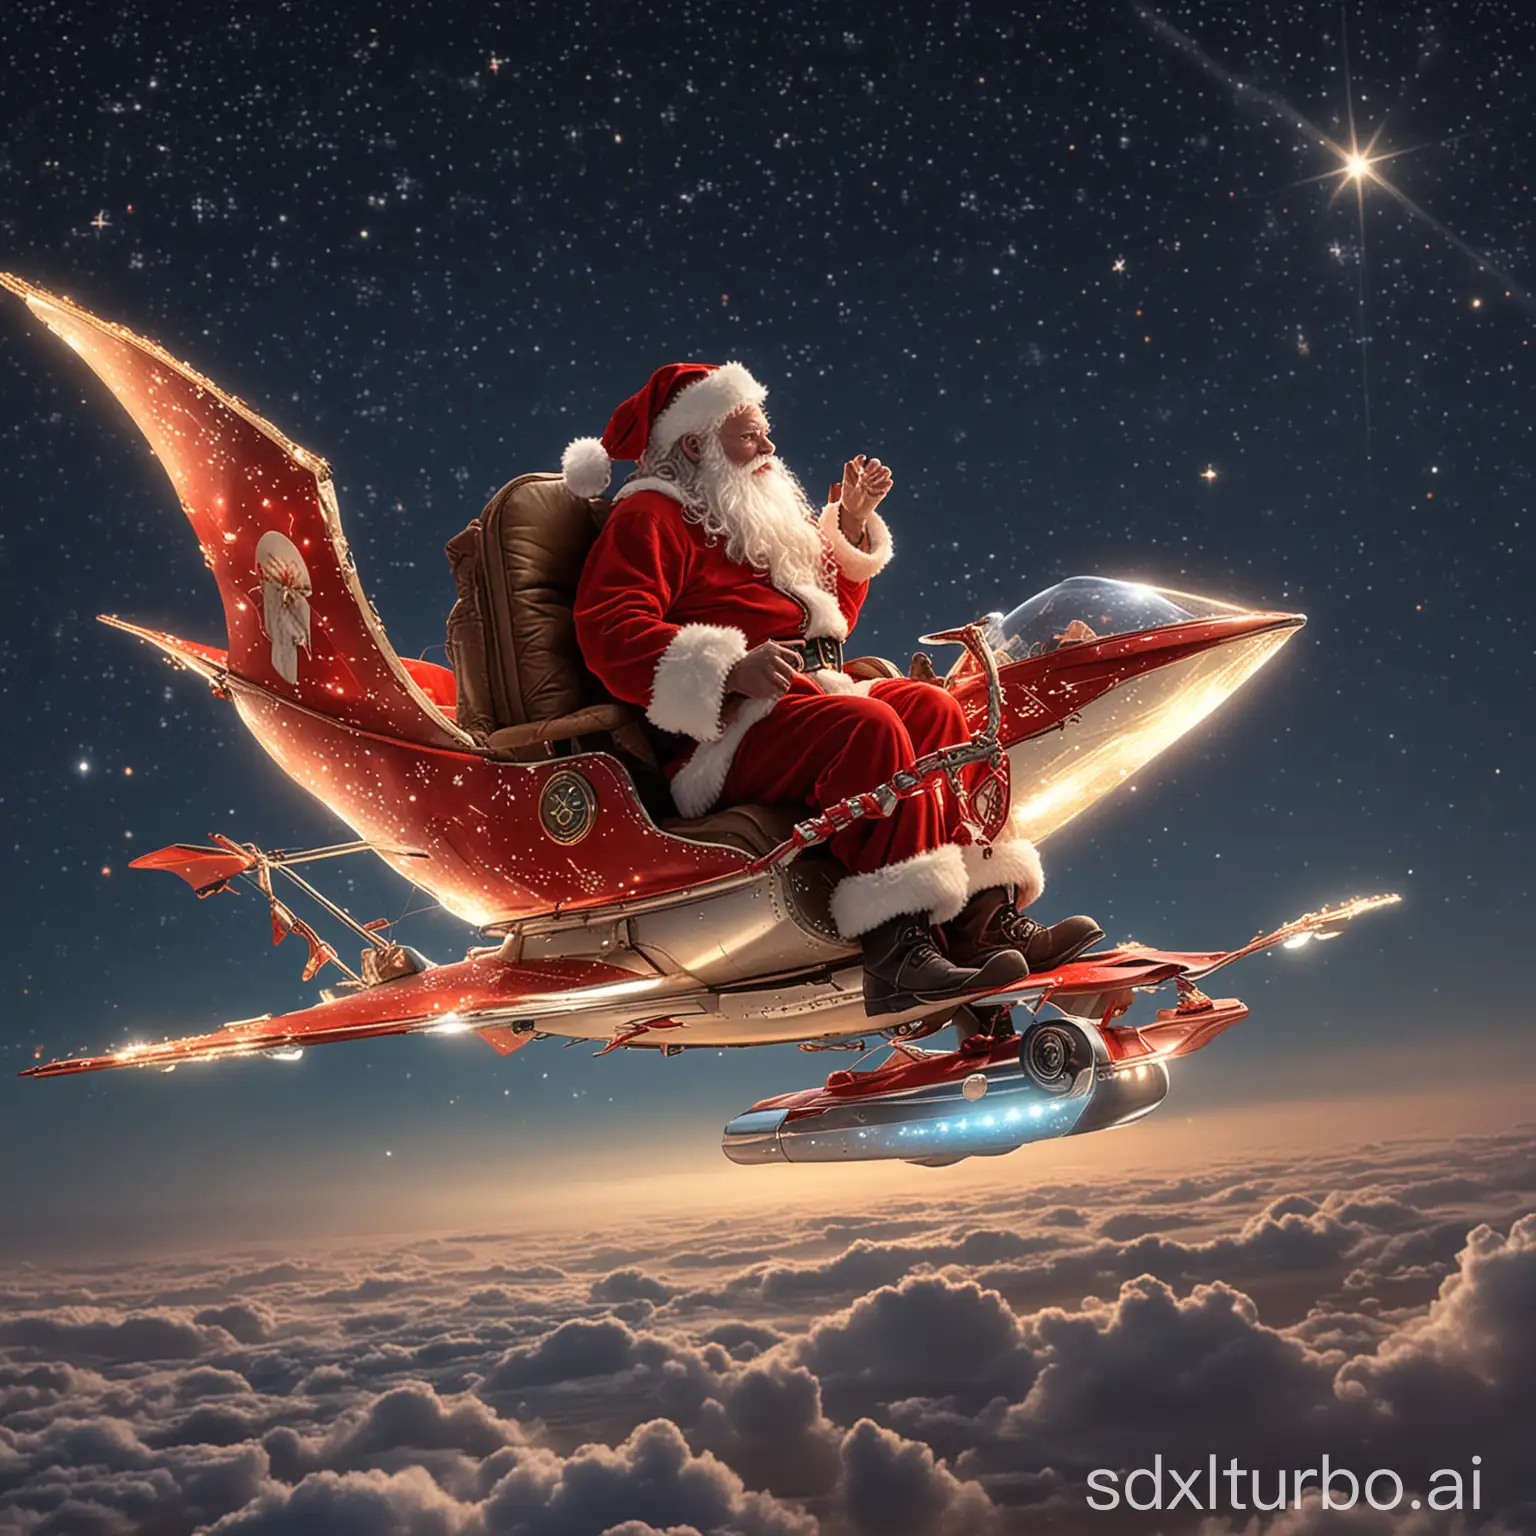 Santa, as he rides on a shimmering manned gliding vehicle, which carries him high into the night sky, where the stars are his only companions.